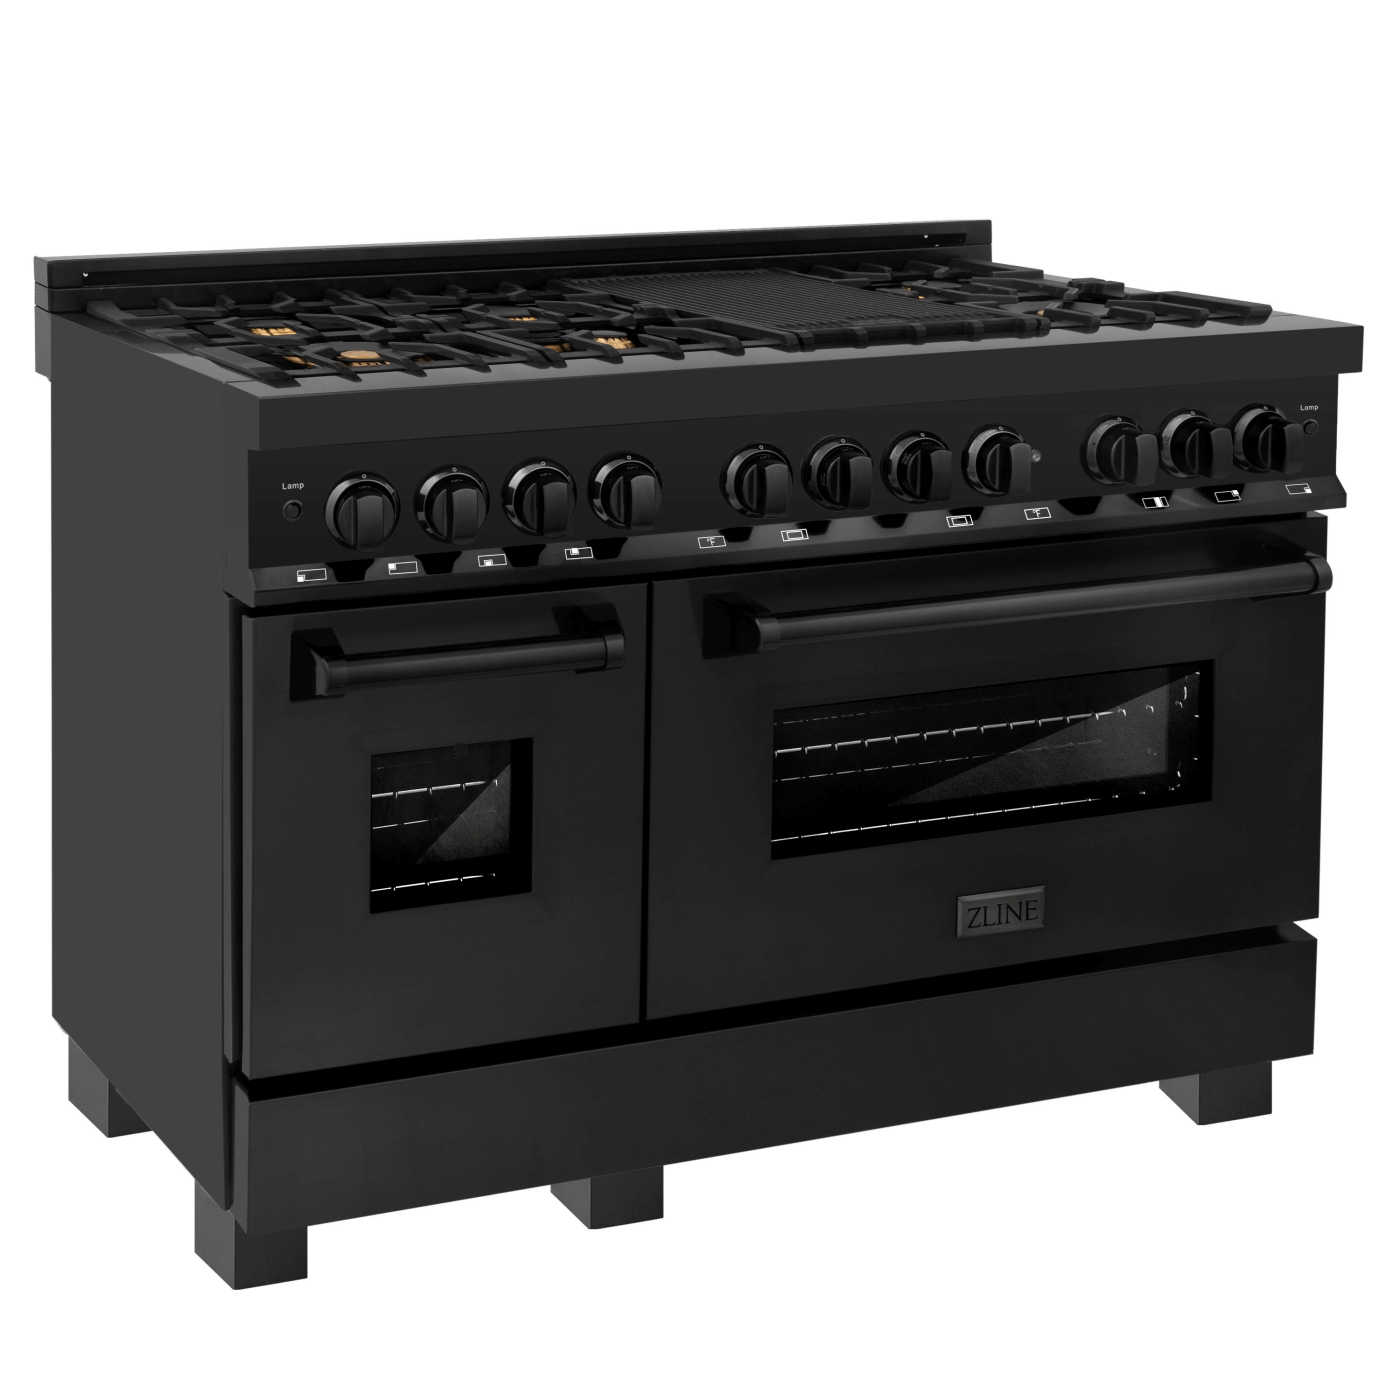 ZLINE 48 in. 6.0 cu. ft. Dual Fuel Range with Gas Stove and Electric Oven in Black Stainless Steel with Brass Burners (RAB-BR-48) - white background